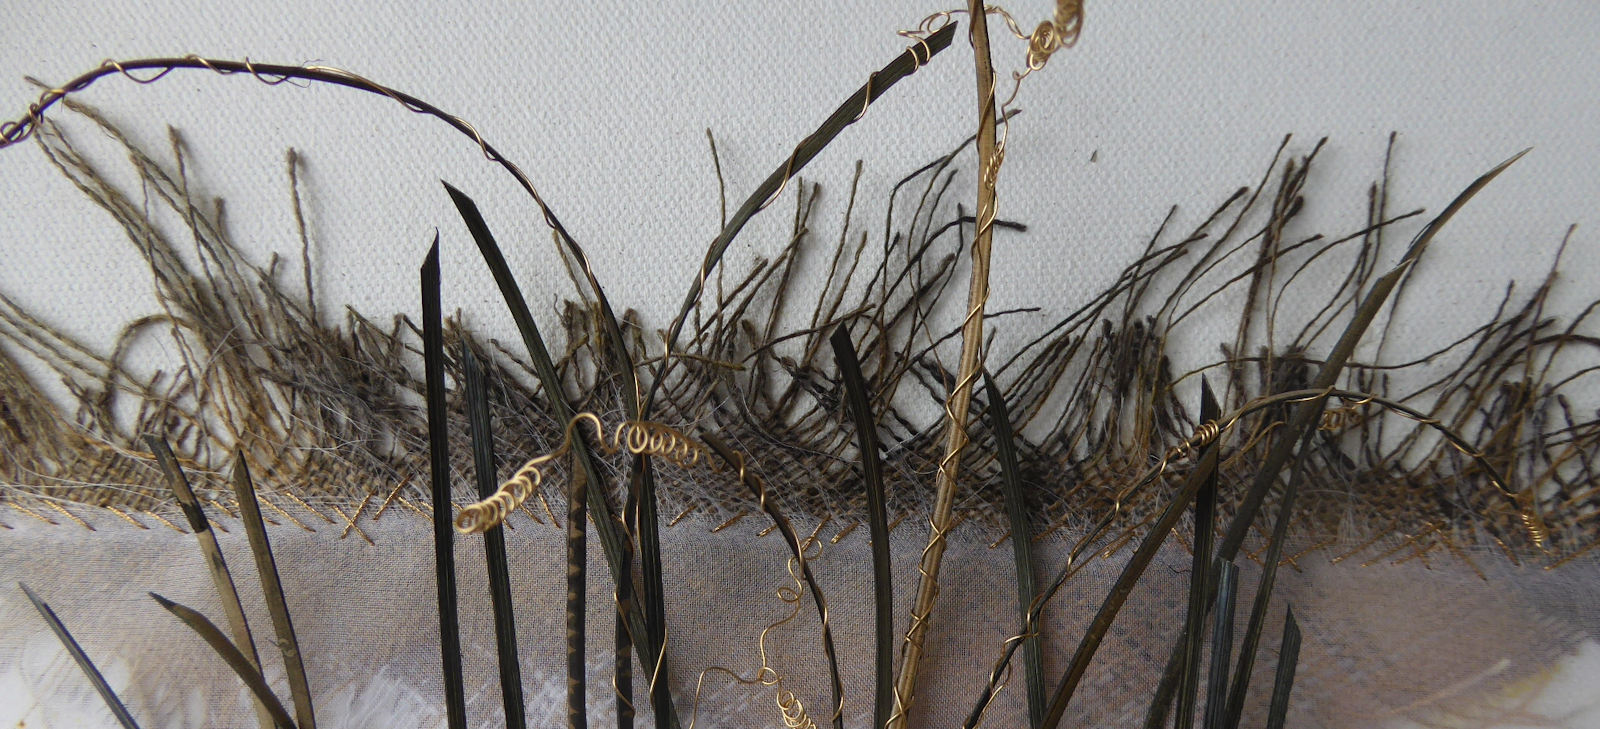 Wrapped canes, grasses and frayed linen edge